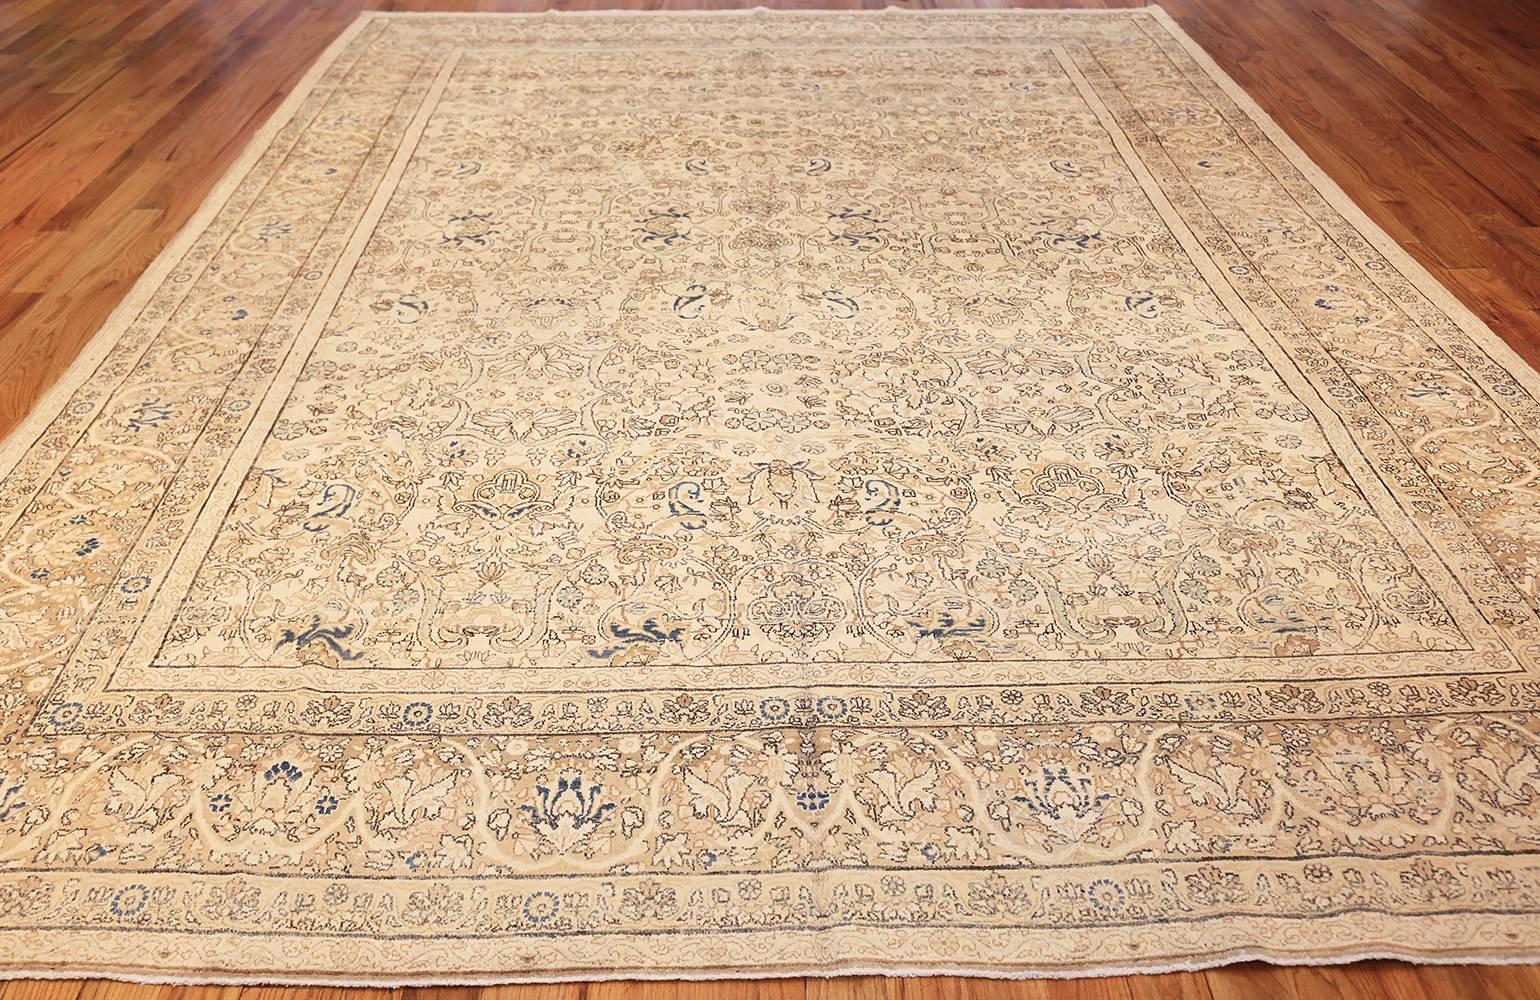 Antique Persian Kerman Rug. Size: 8 ft 10 in x 12 ft (2.69 m x 3.66 m) 2